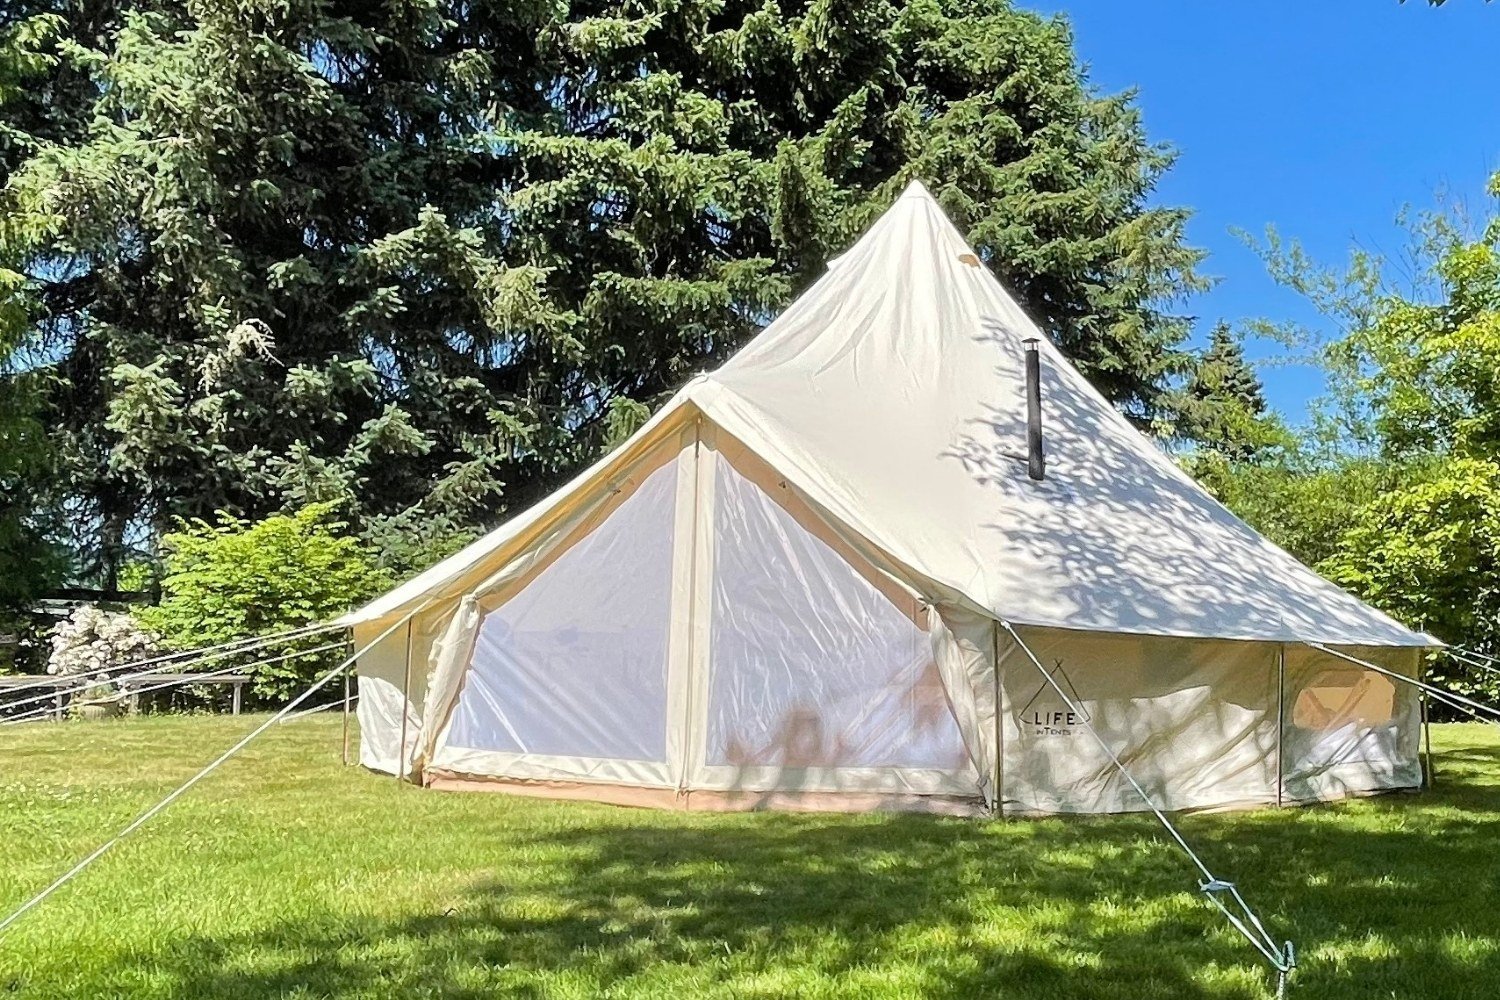 A clean bell tent in the sun on grass